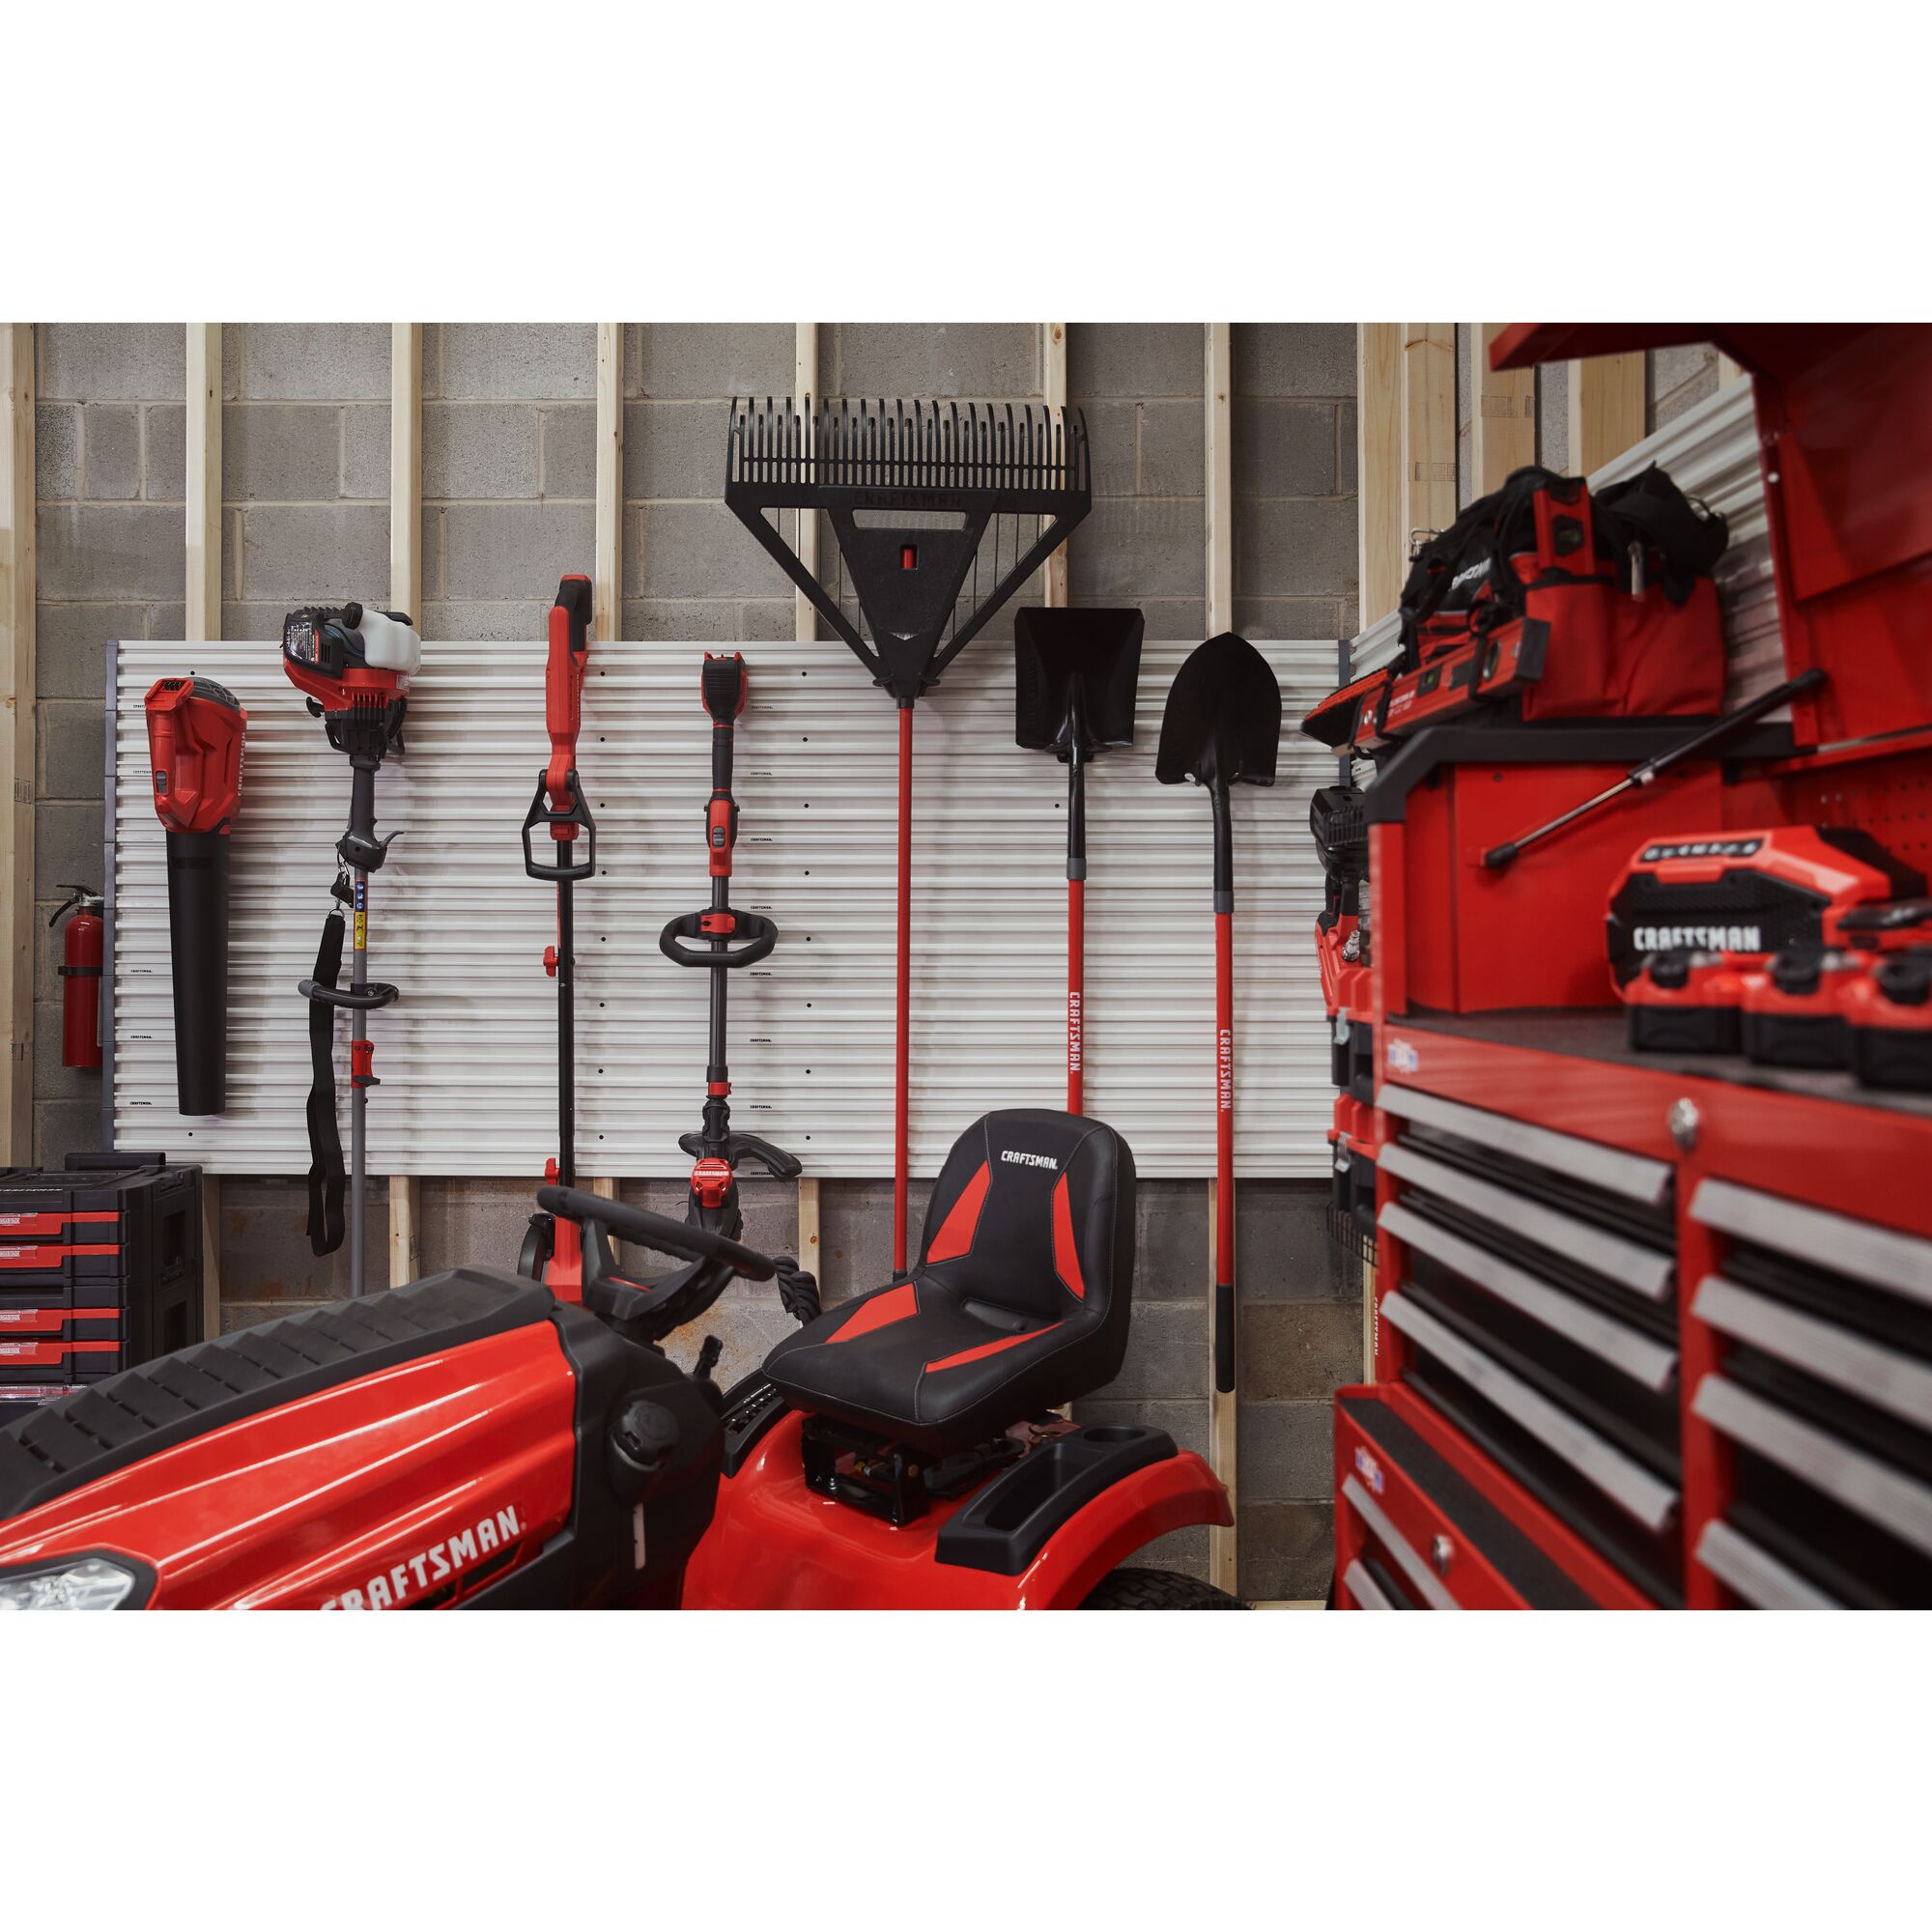 Garage filled with CRAFSTMAN outdoor, storage, and power tools